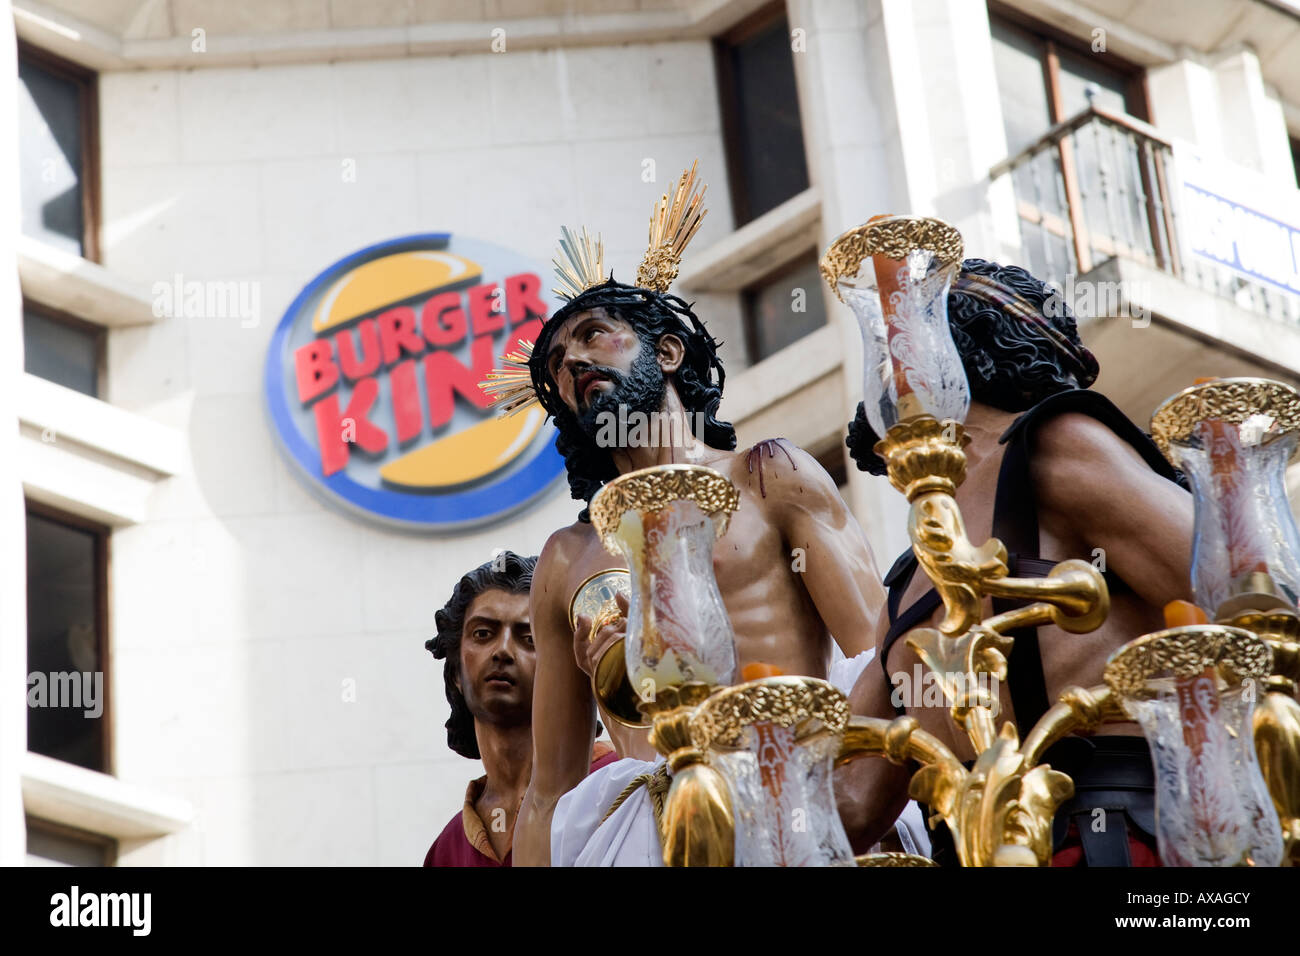 An image of Christ in front of Burger King logo during Holy Week processions, Seville, Spain Stock Photo